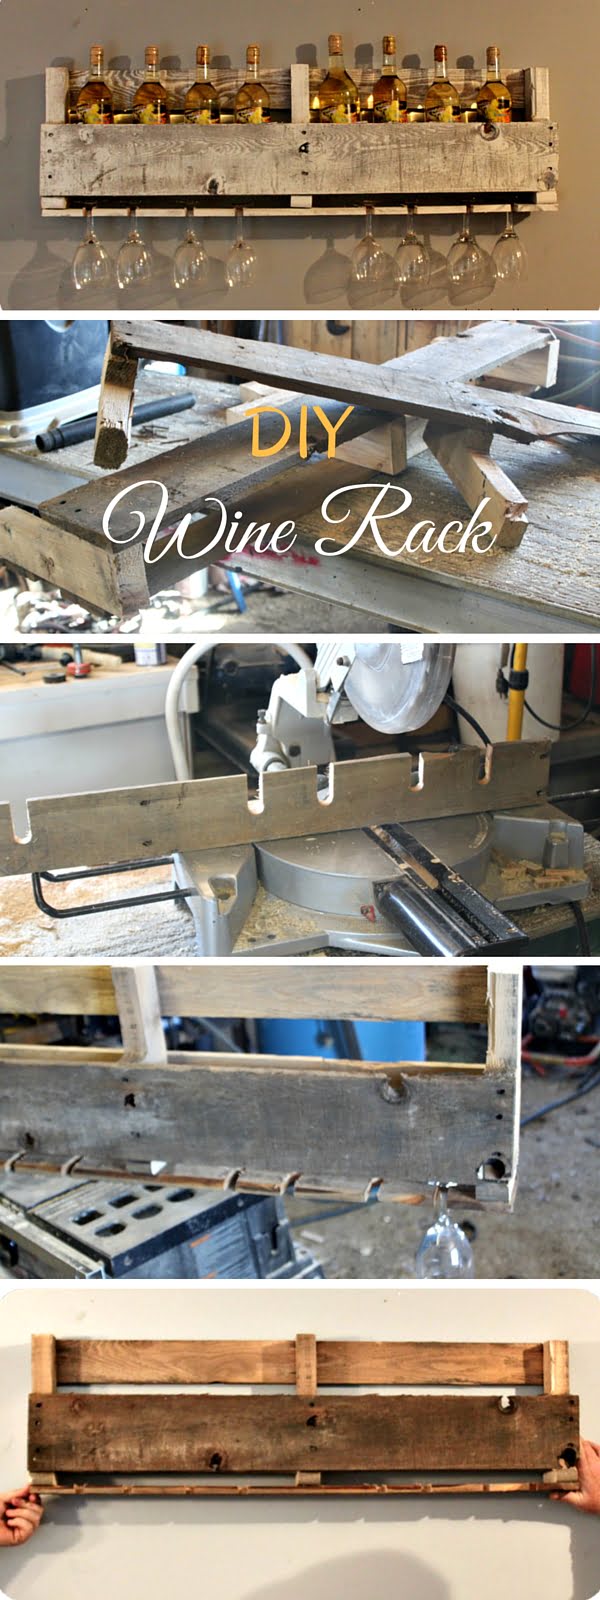 How to build a pallet wine rack     